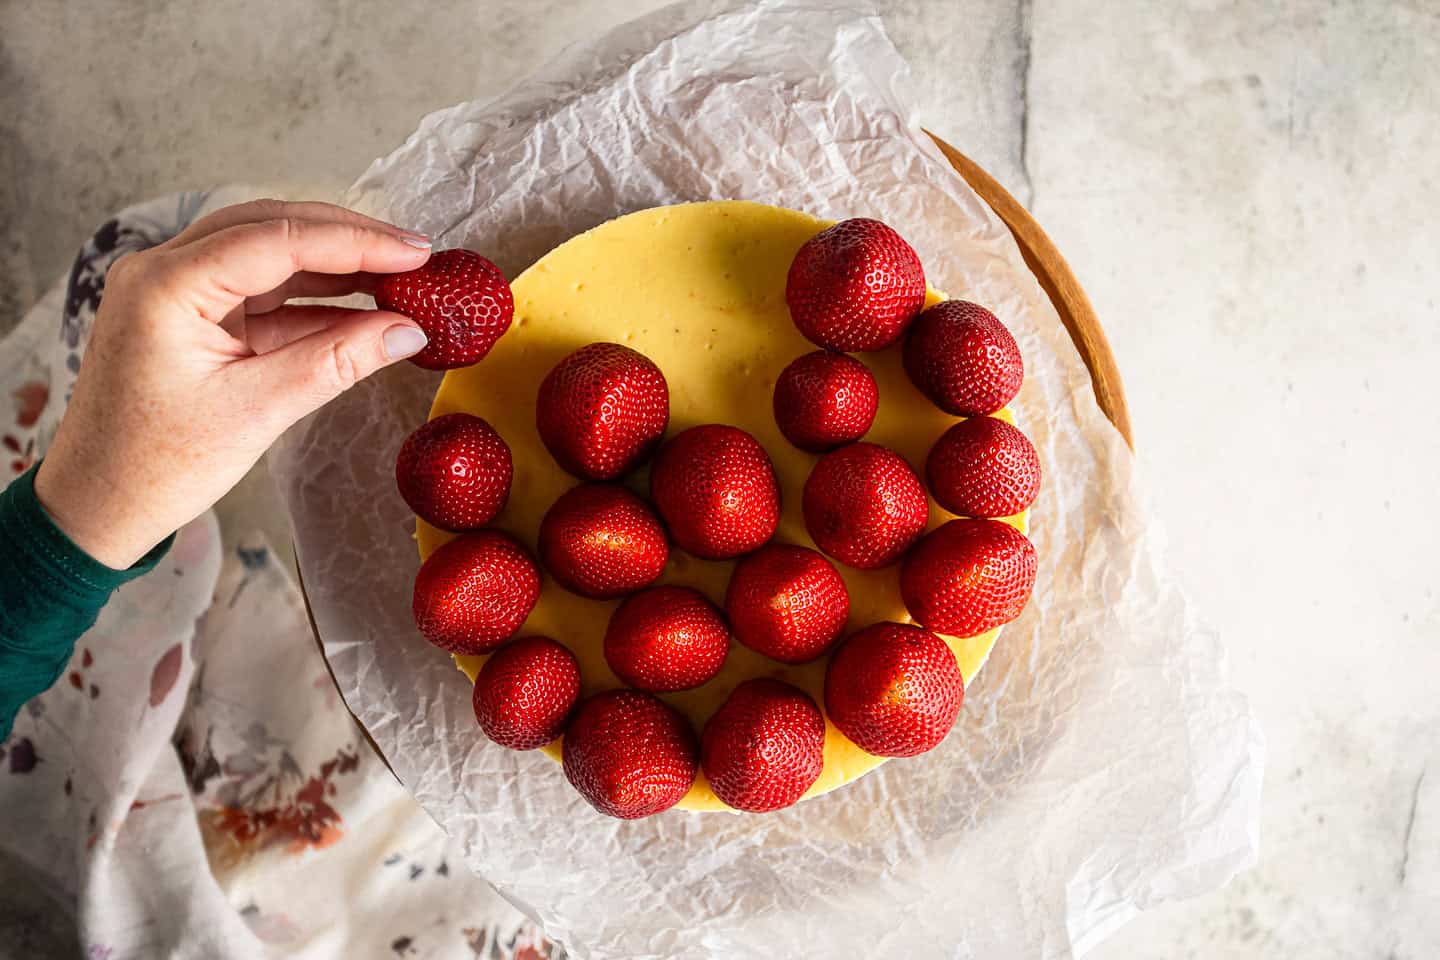 Placing fresh strawberries on a cheesecake.